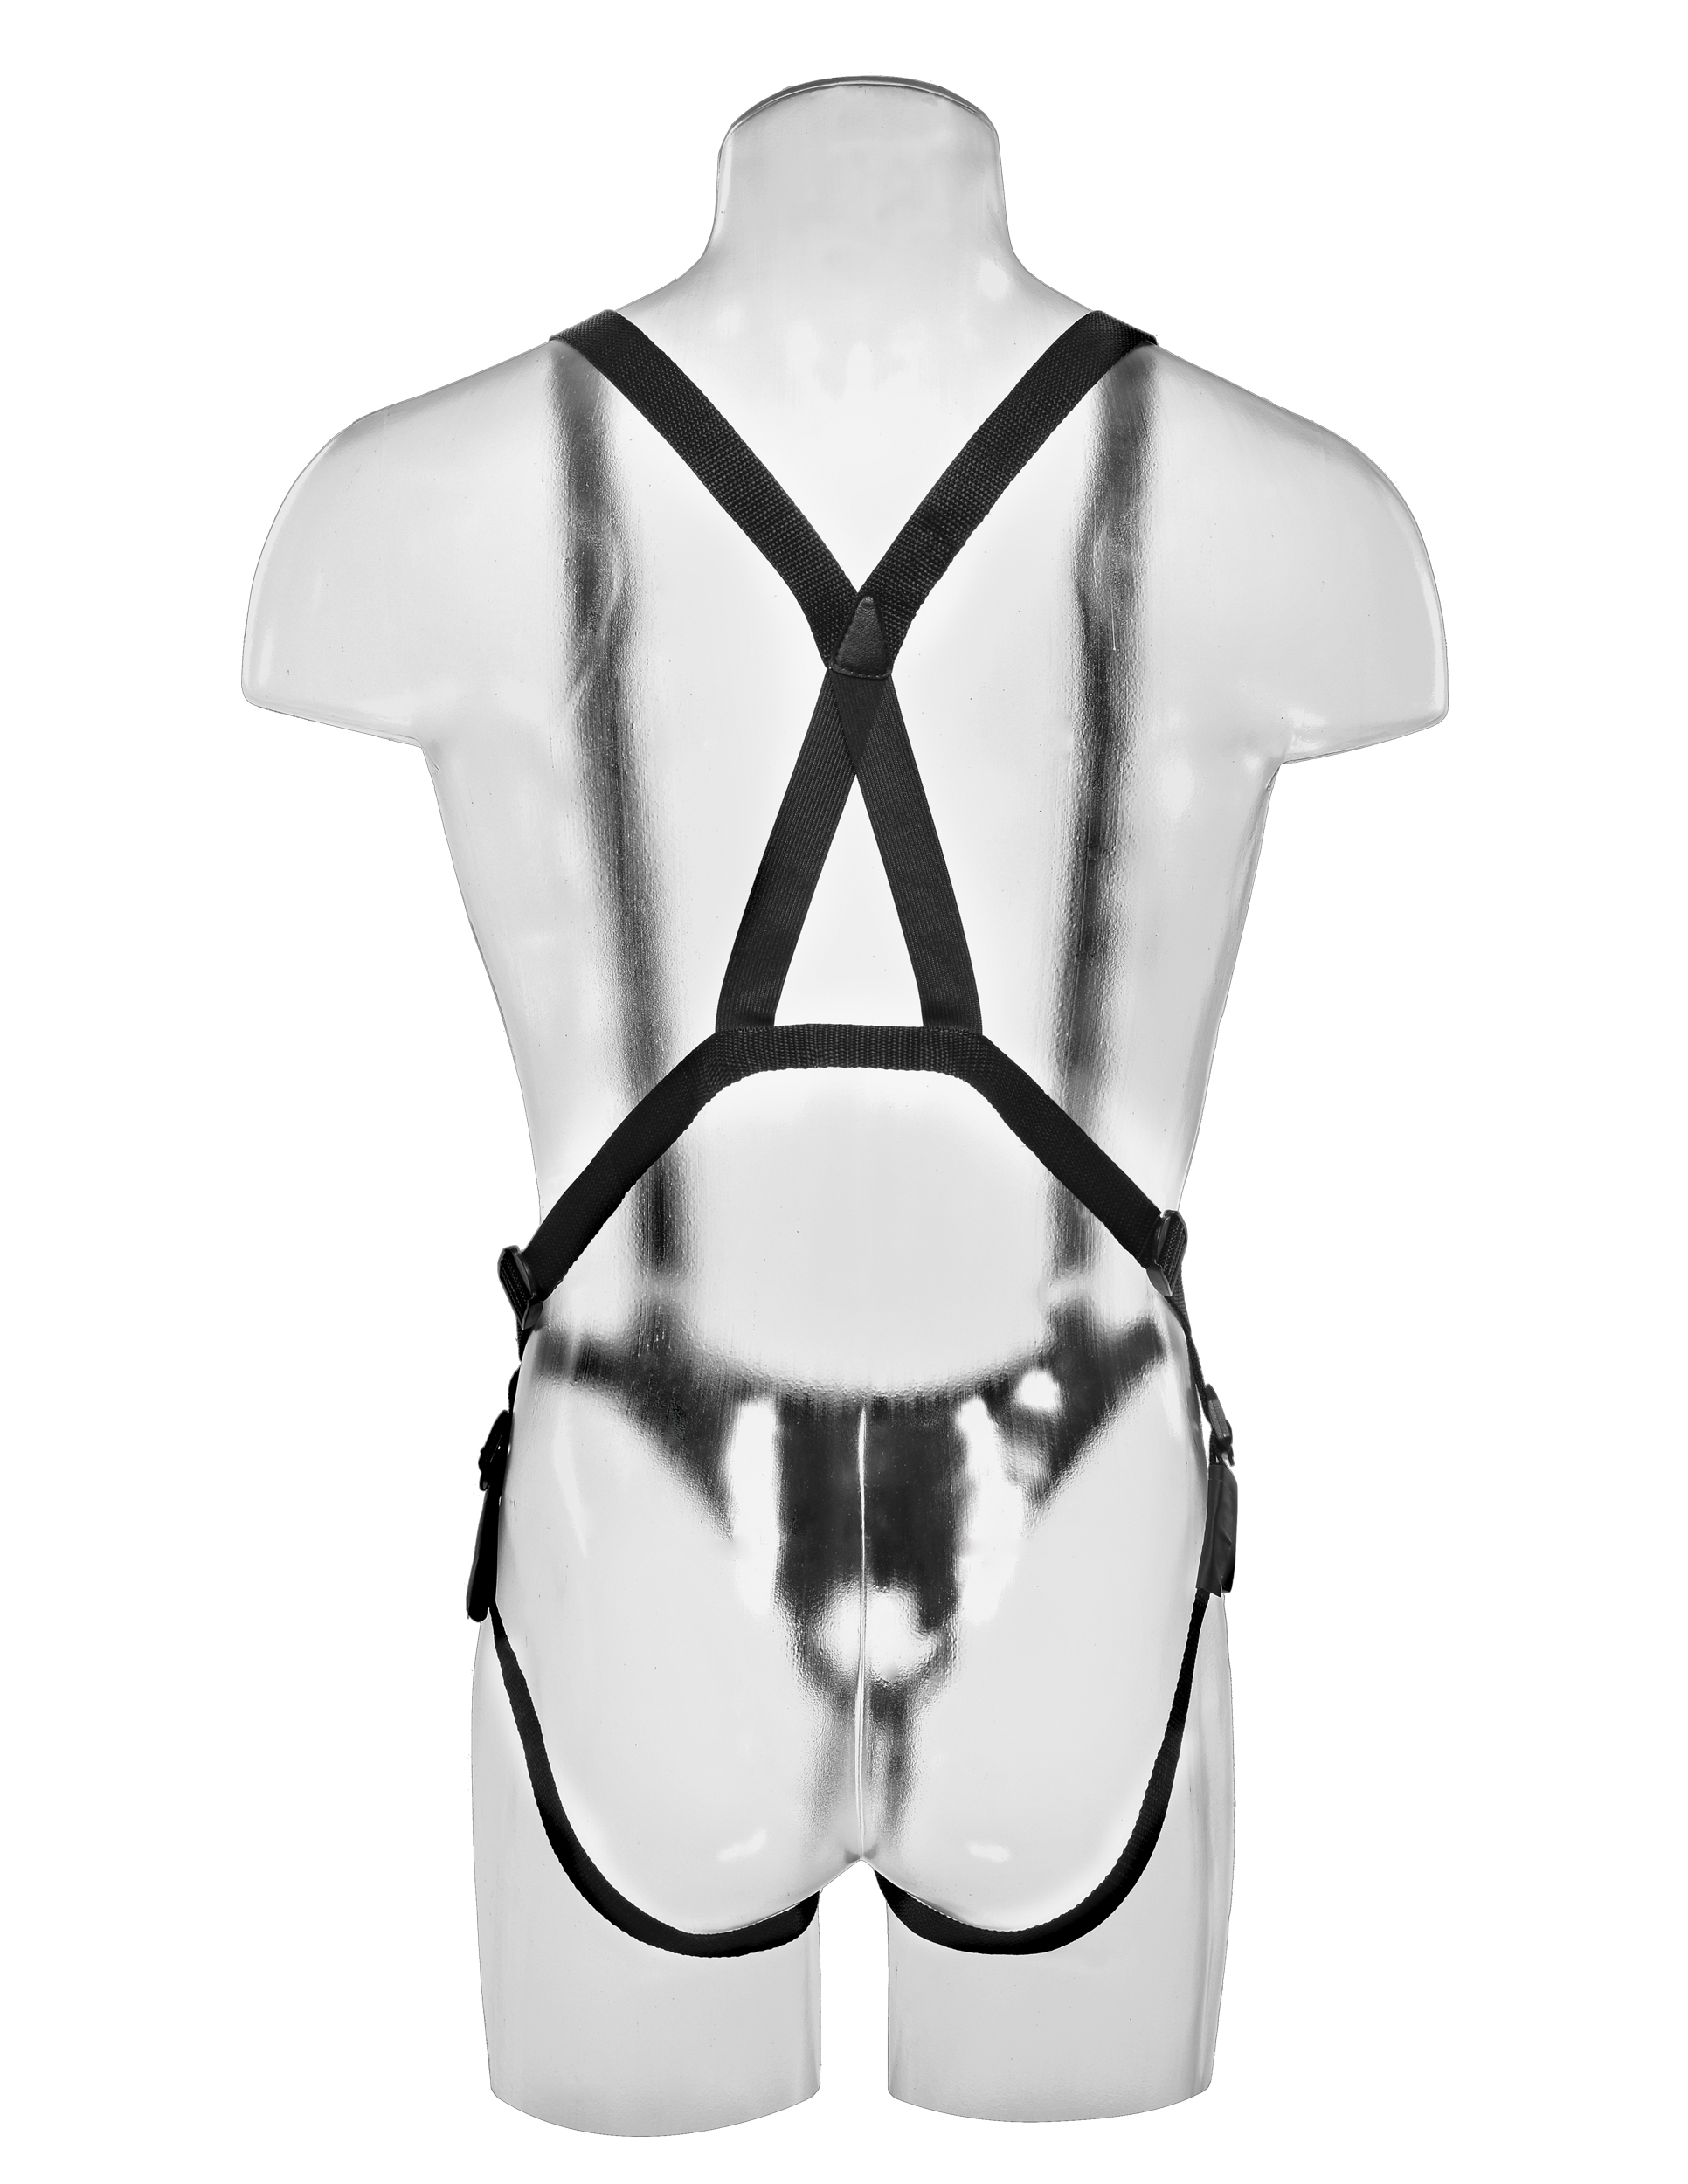 king cock  inch hollow strap on suspender system flesh 